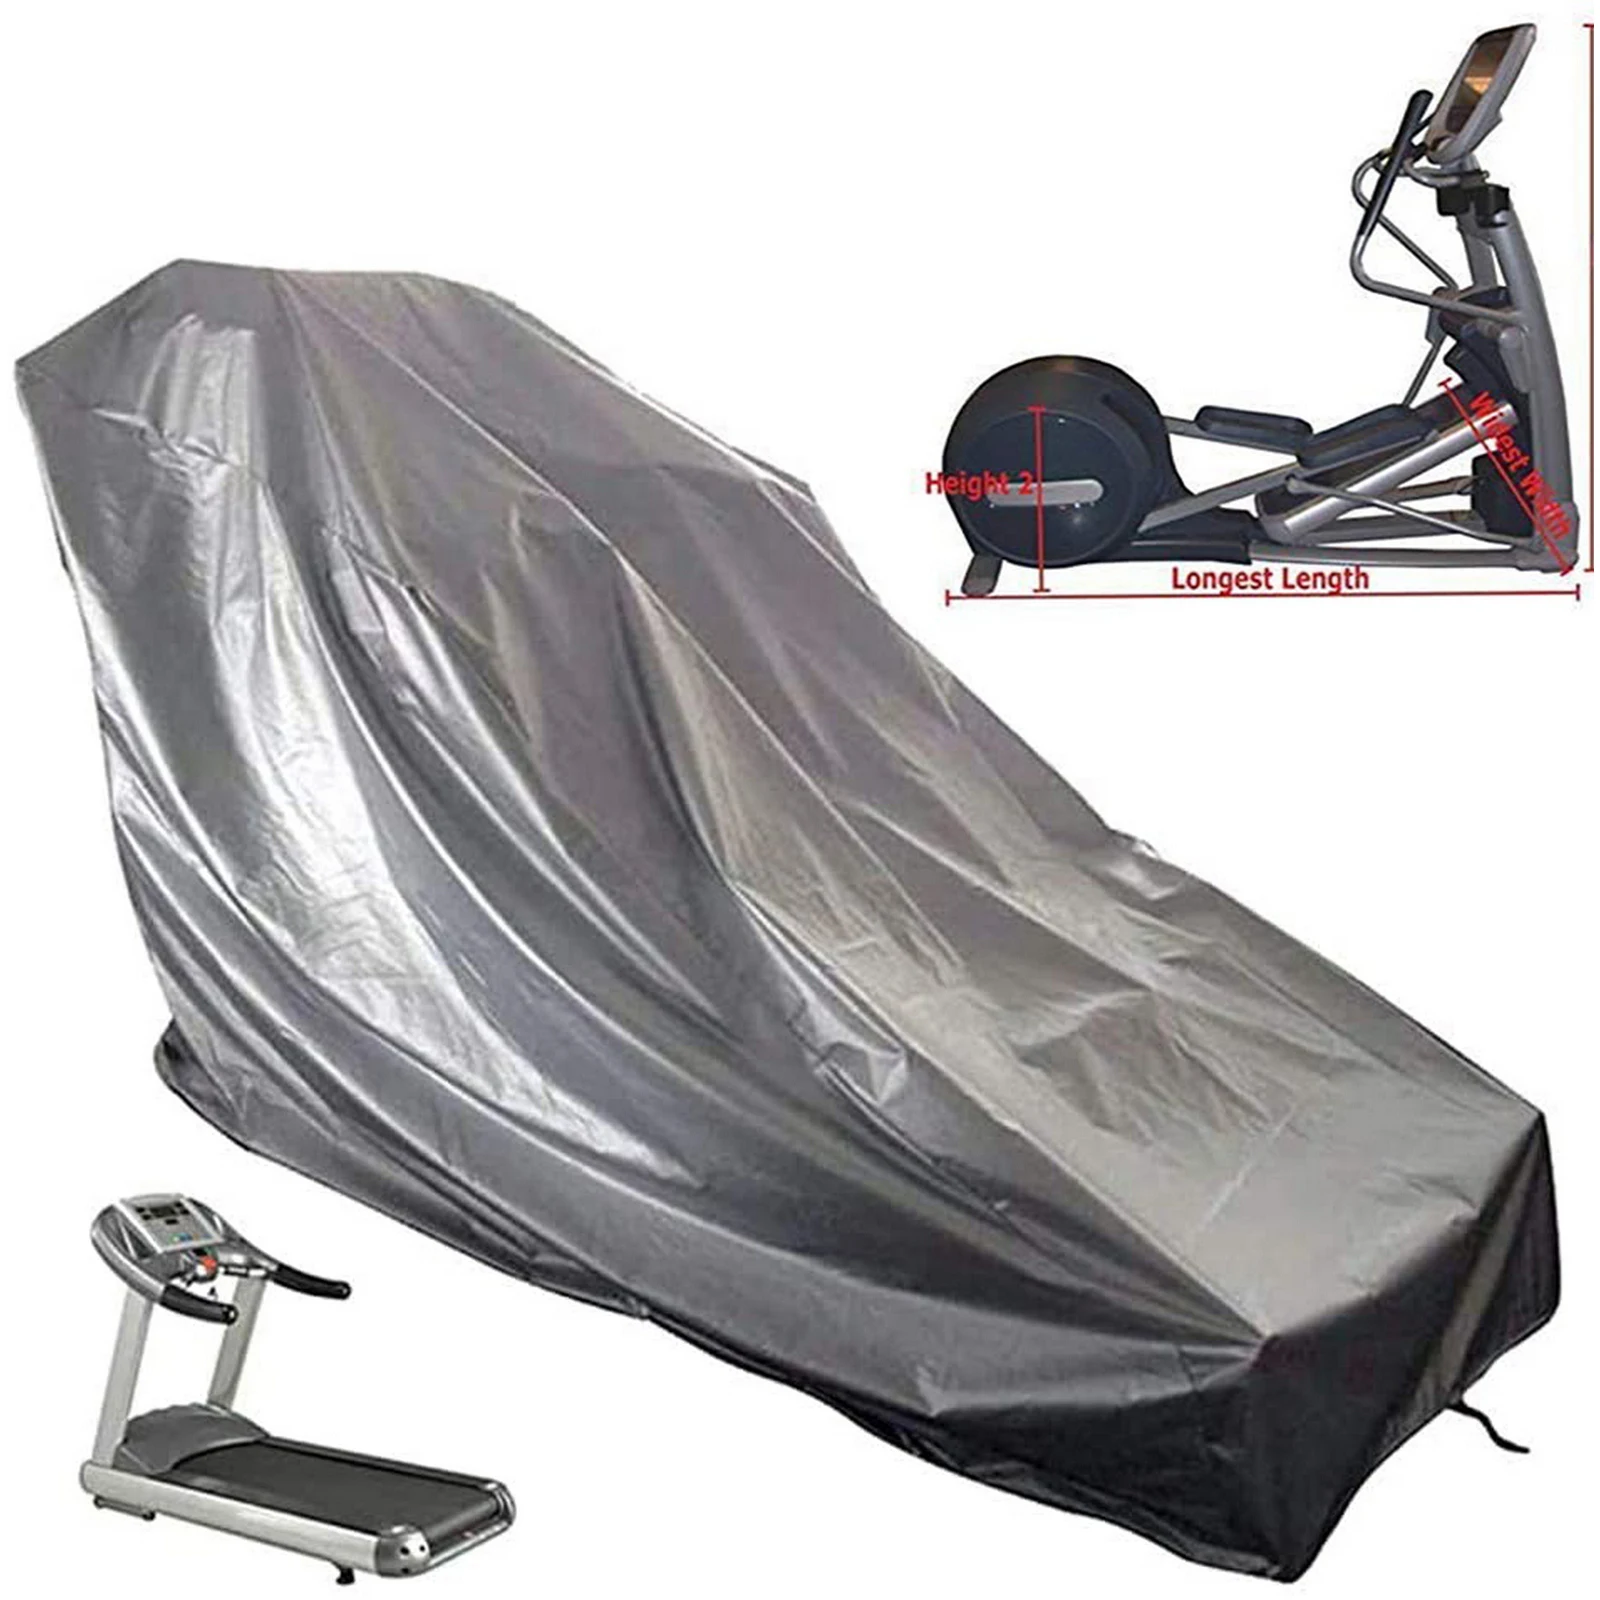 

Spinning Bike Dustproof Rainproof Cover For Outdoor Treadmill 210/420D Silver Gray Oxford Cloth Waterproof Protection Cover